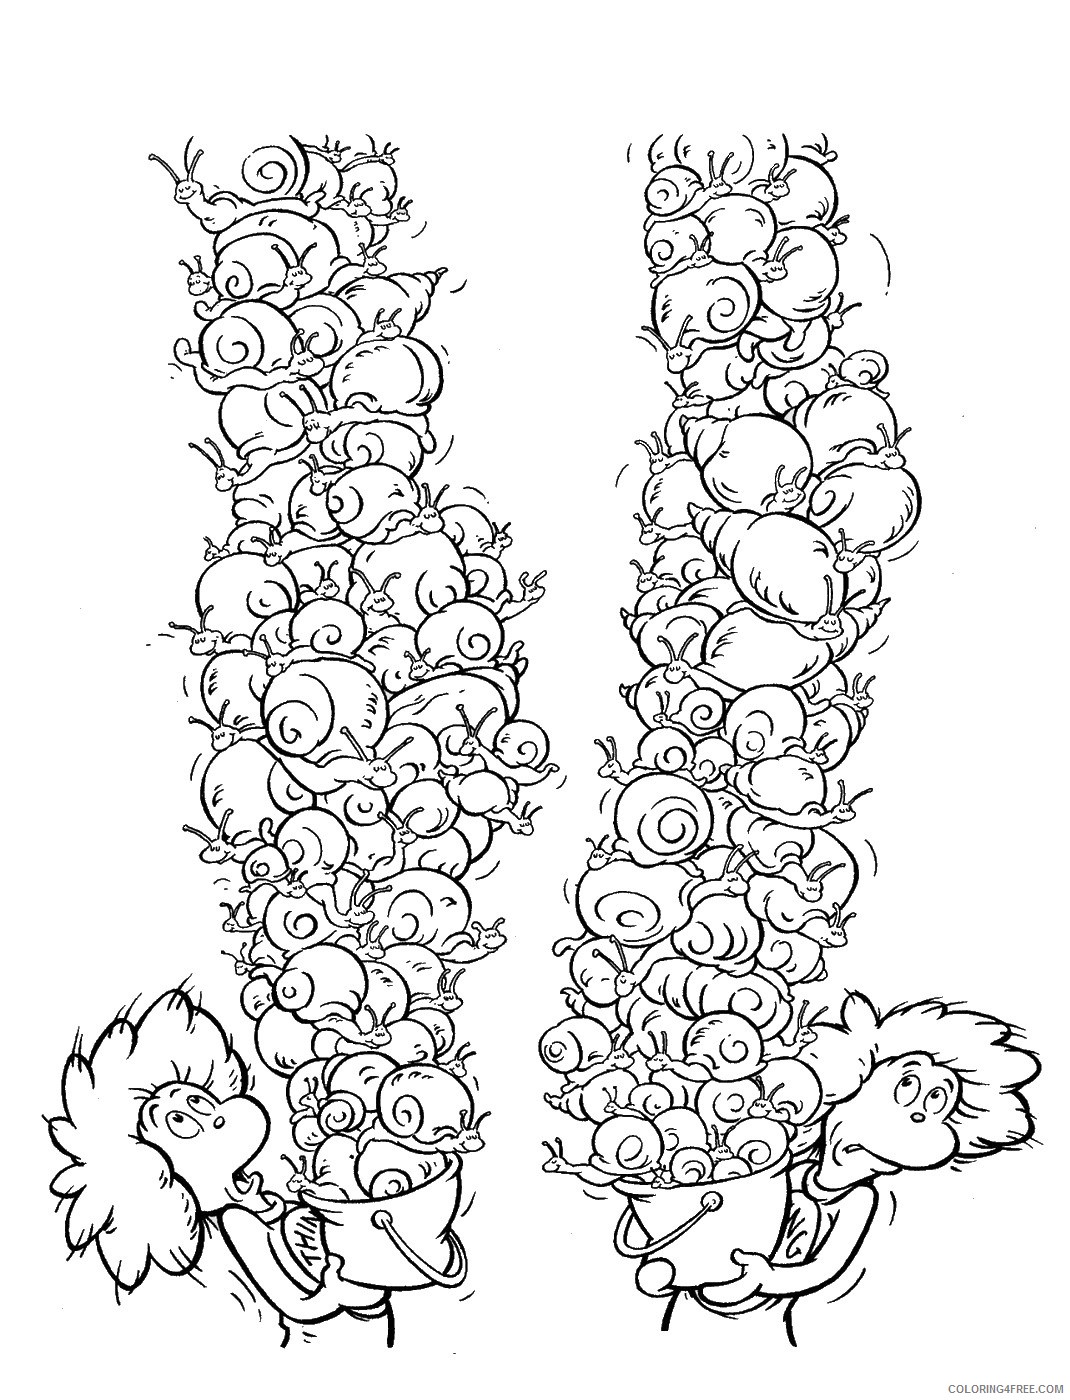 The Cat in the Hat Coloring Pages Cartoons cat_hat_cl_19 Printable 2020 6382 Coloring4free